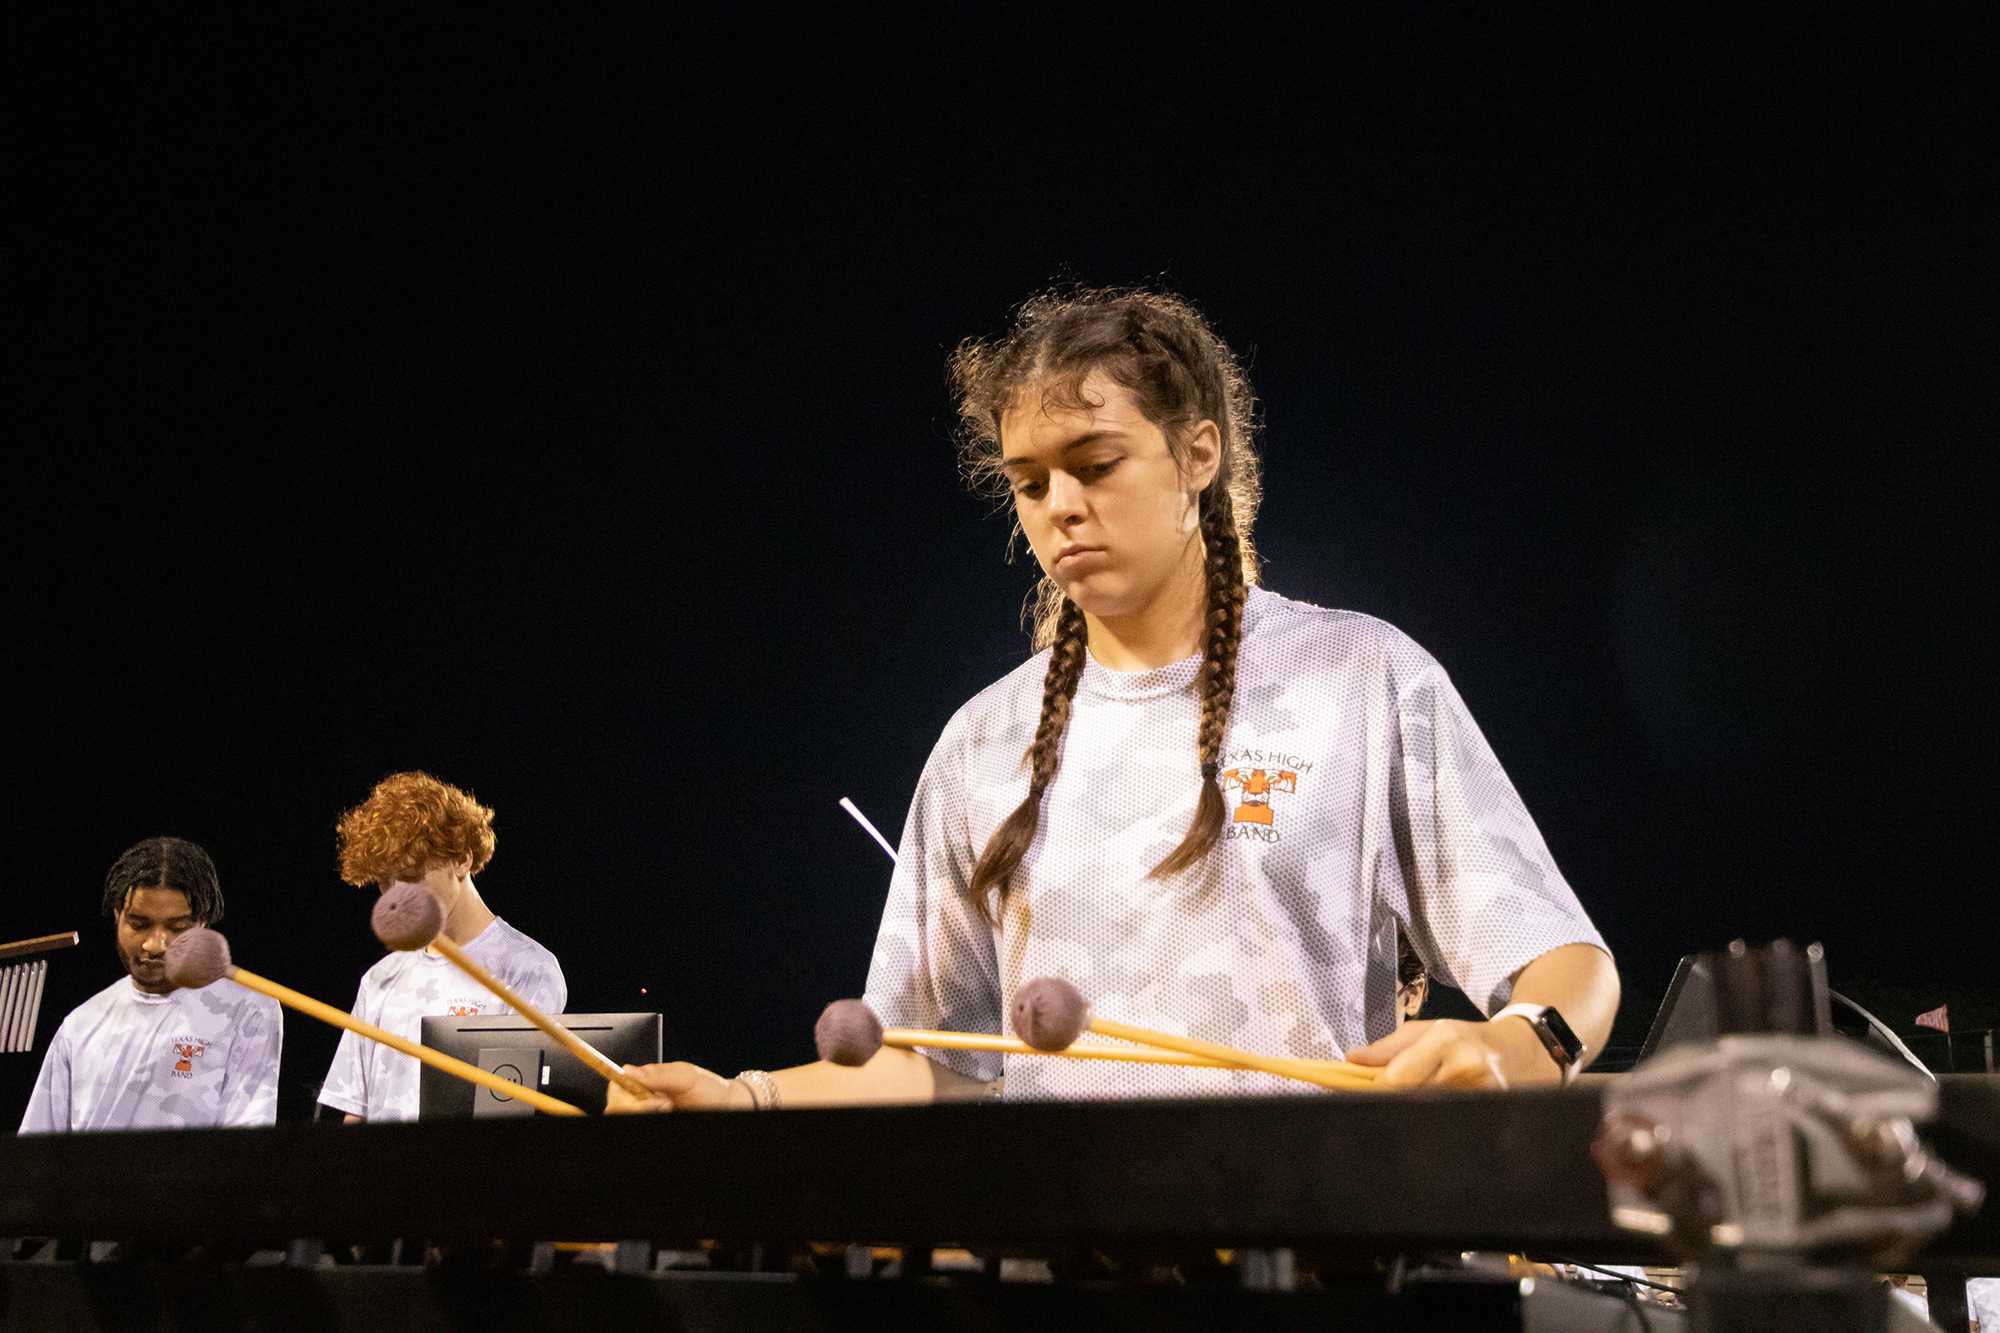 Concentration clear on her face, Lourdes Quijas plays the vibraphone in Queen of the night her junior year.